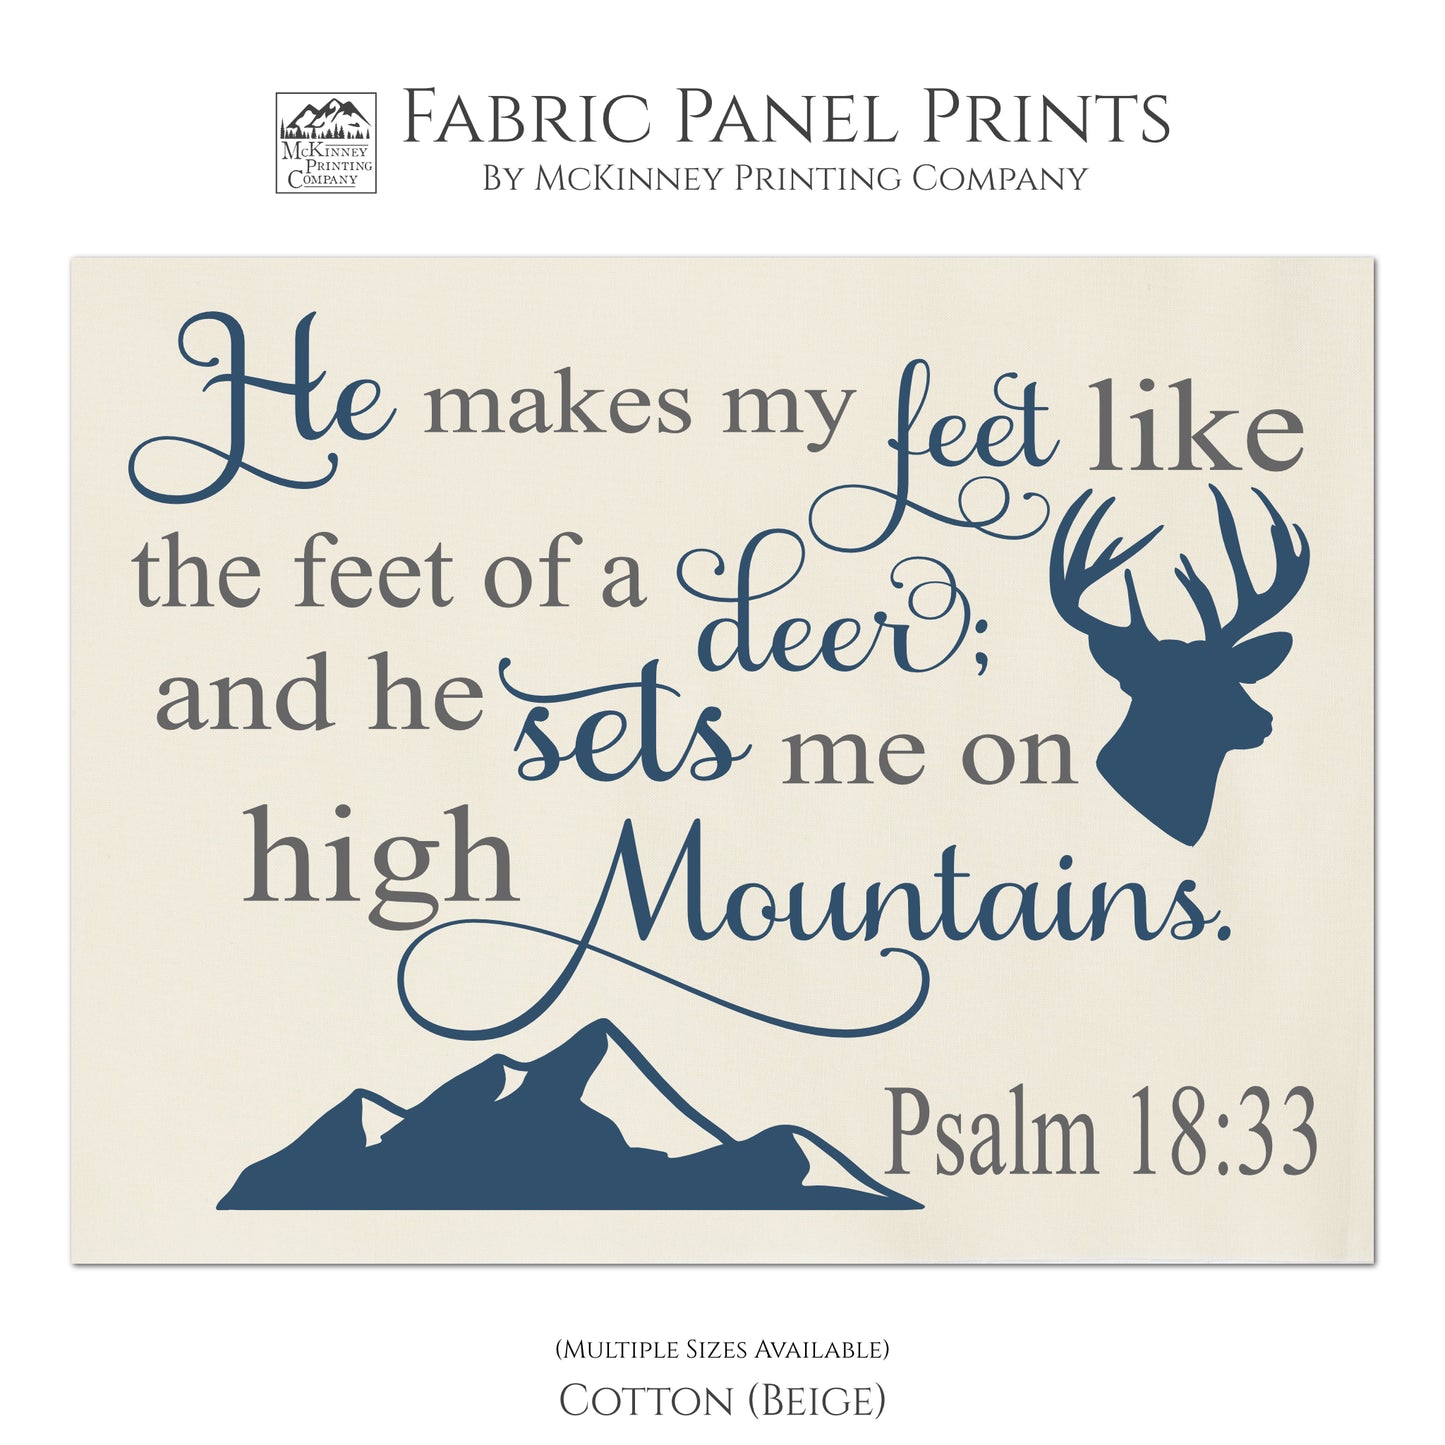 He makes my feet like the feet of a deer; and he sets me on high mountains - Psalm 18:33 - Christian Fabric Panel Print, Quilt Block, Scripture Fabric - Cotton